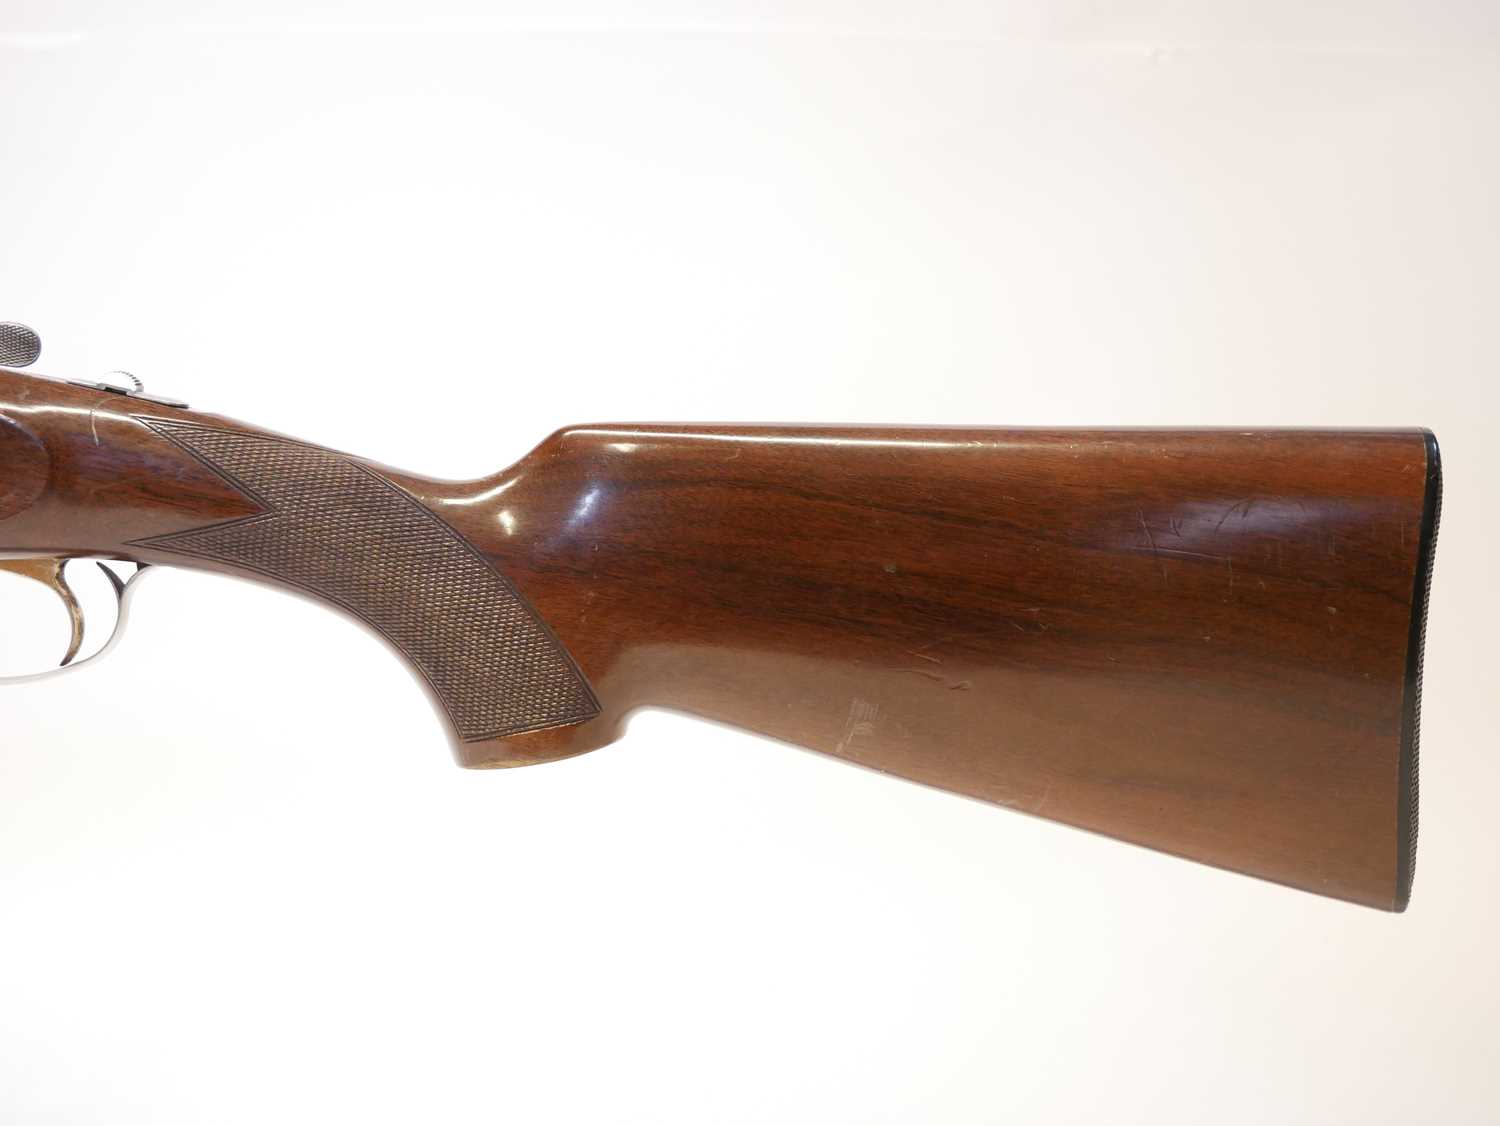 Medallist (Browning) 12 bore over and under shotgun, serial number 142583, 28 inch multichoke - Image 12 of 14